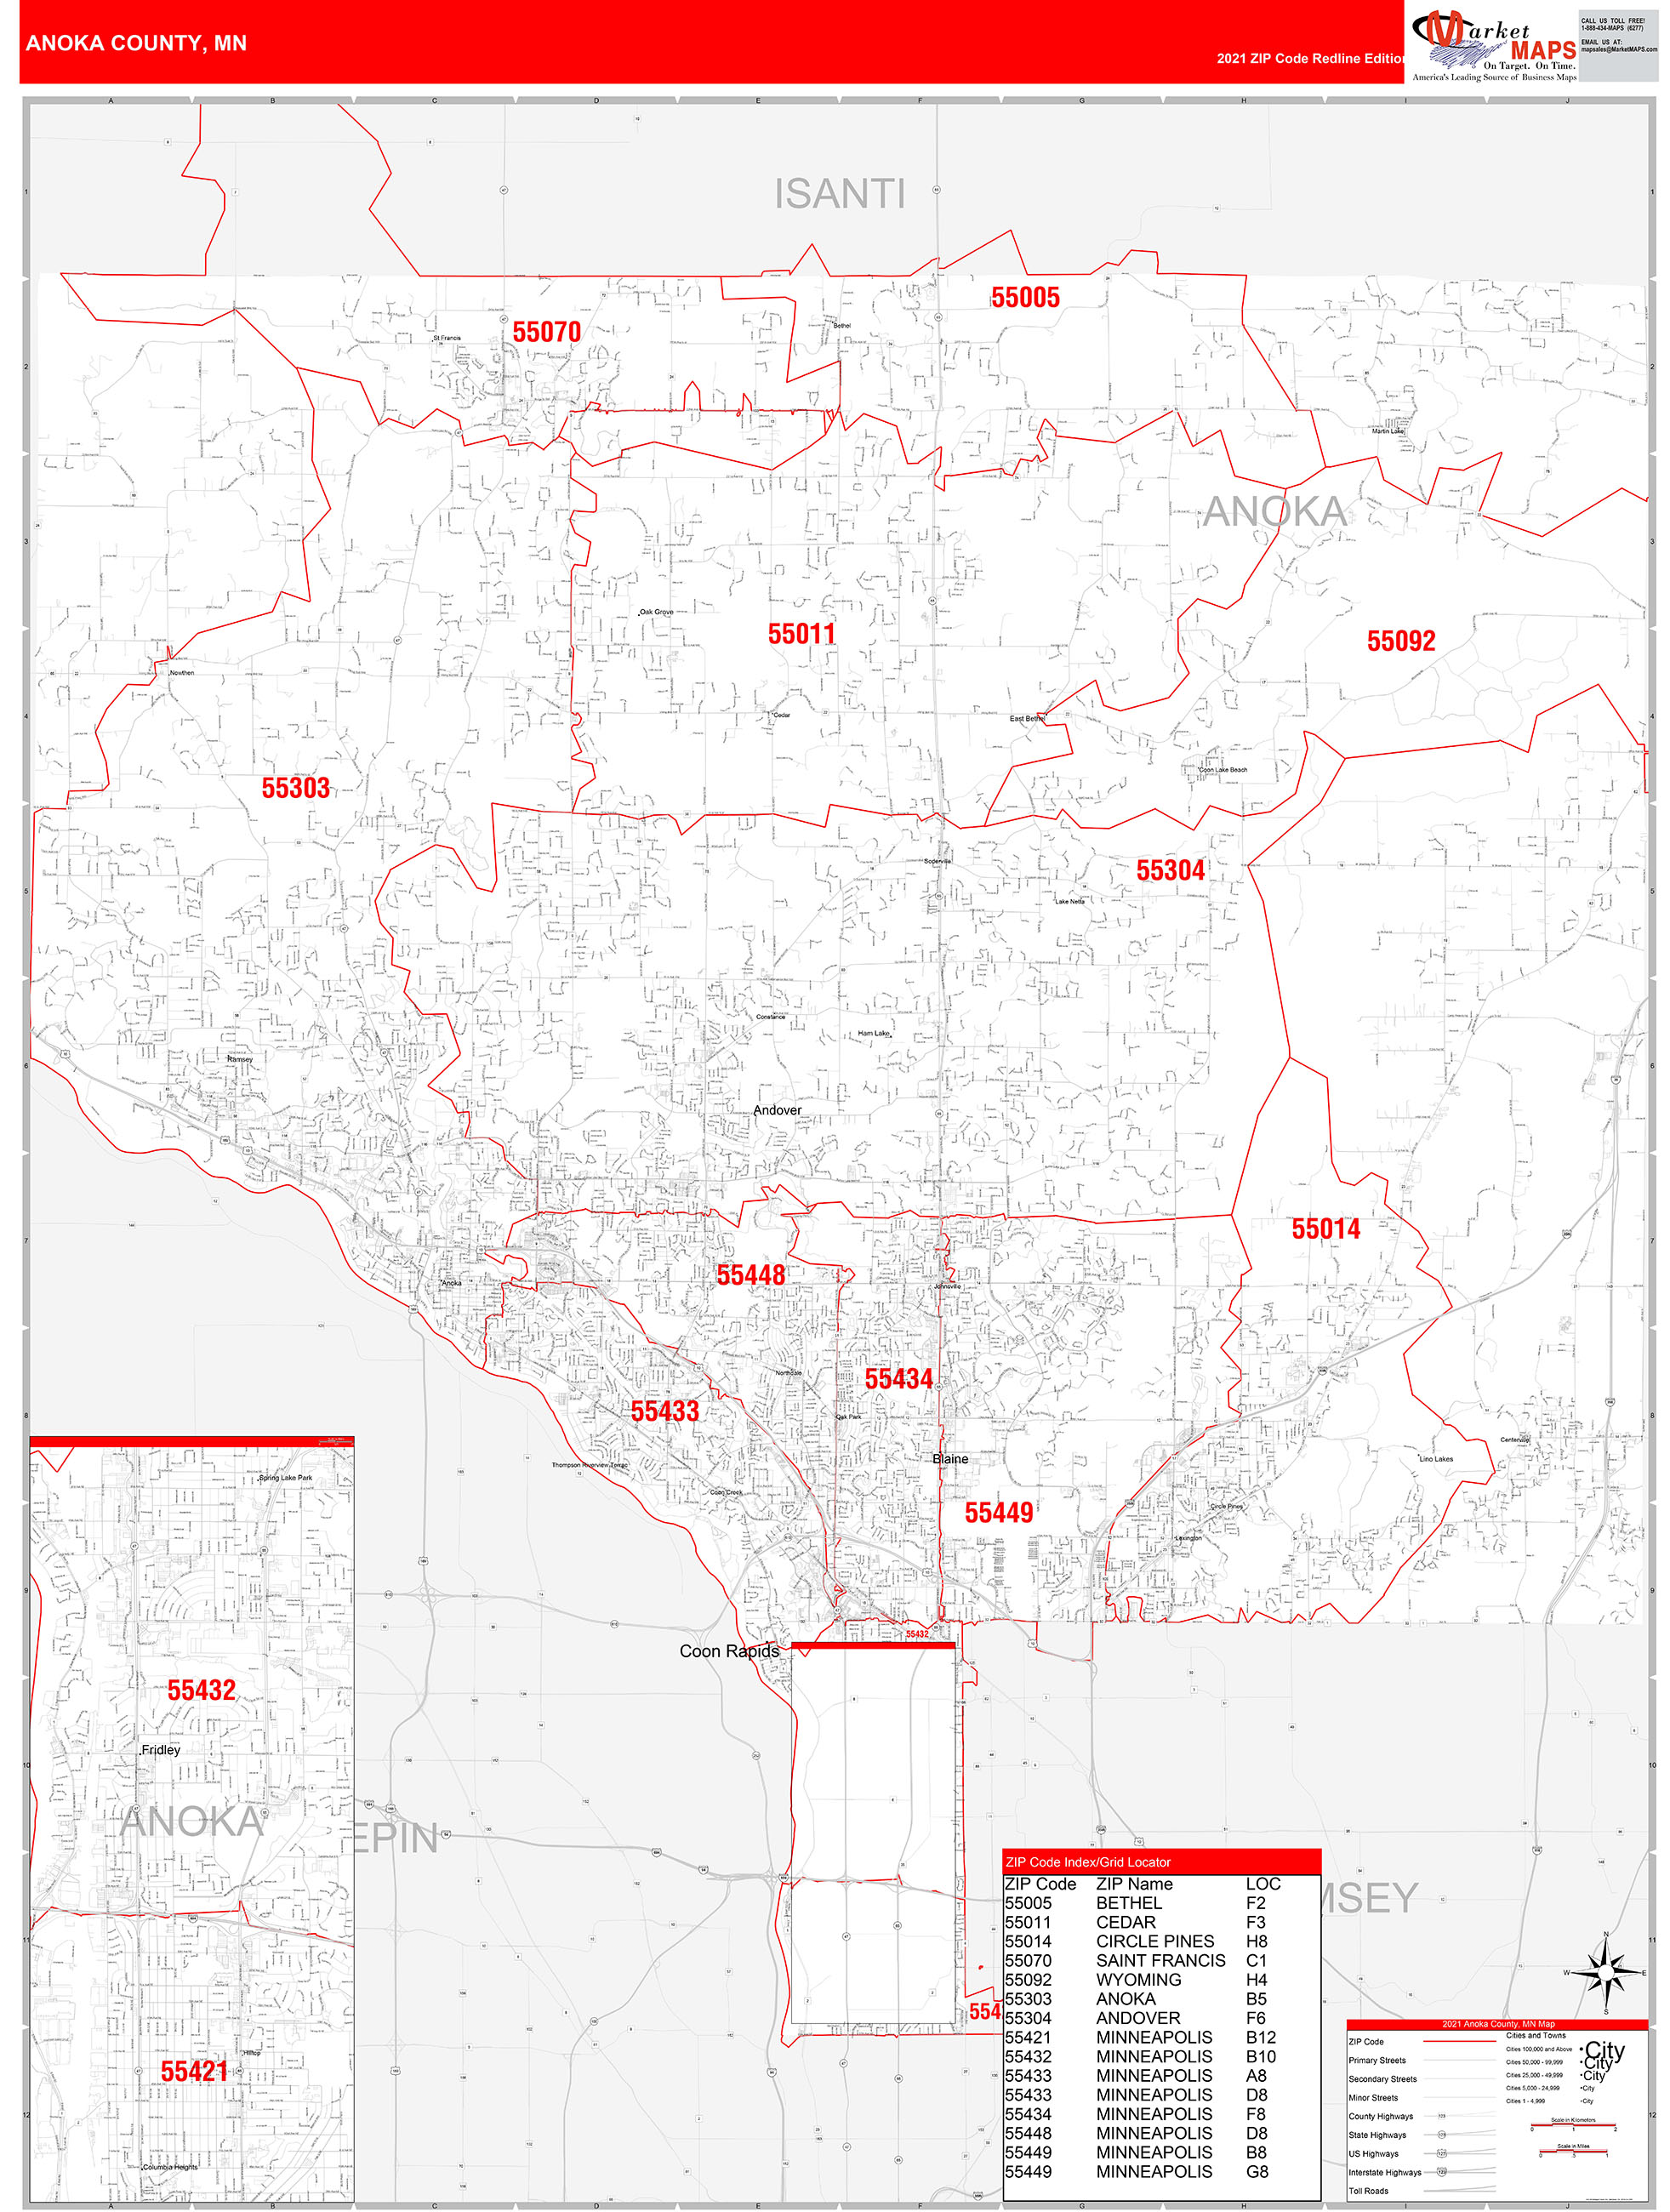 Anoka County, MN Zip Code Wall Map Red Line Style by MarketMAPS MapSales